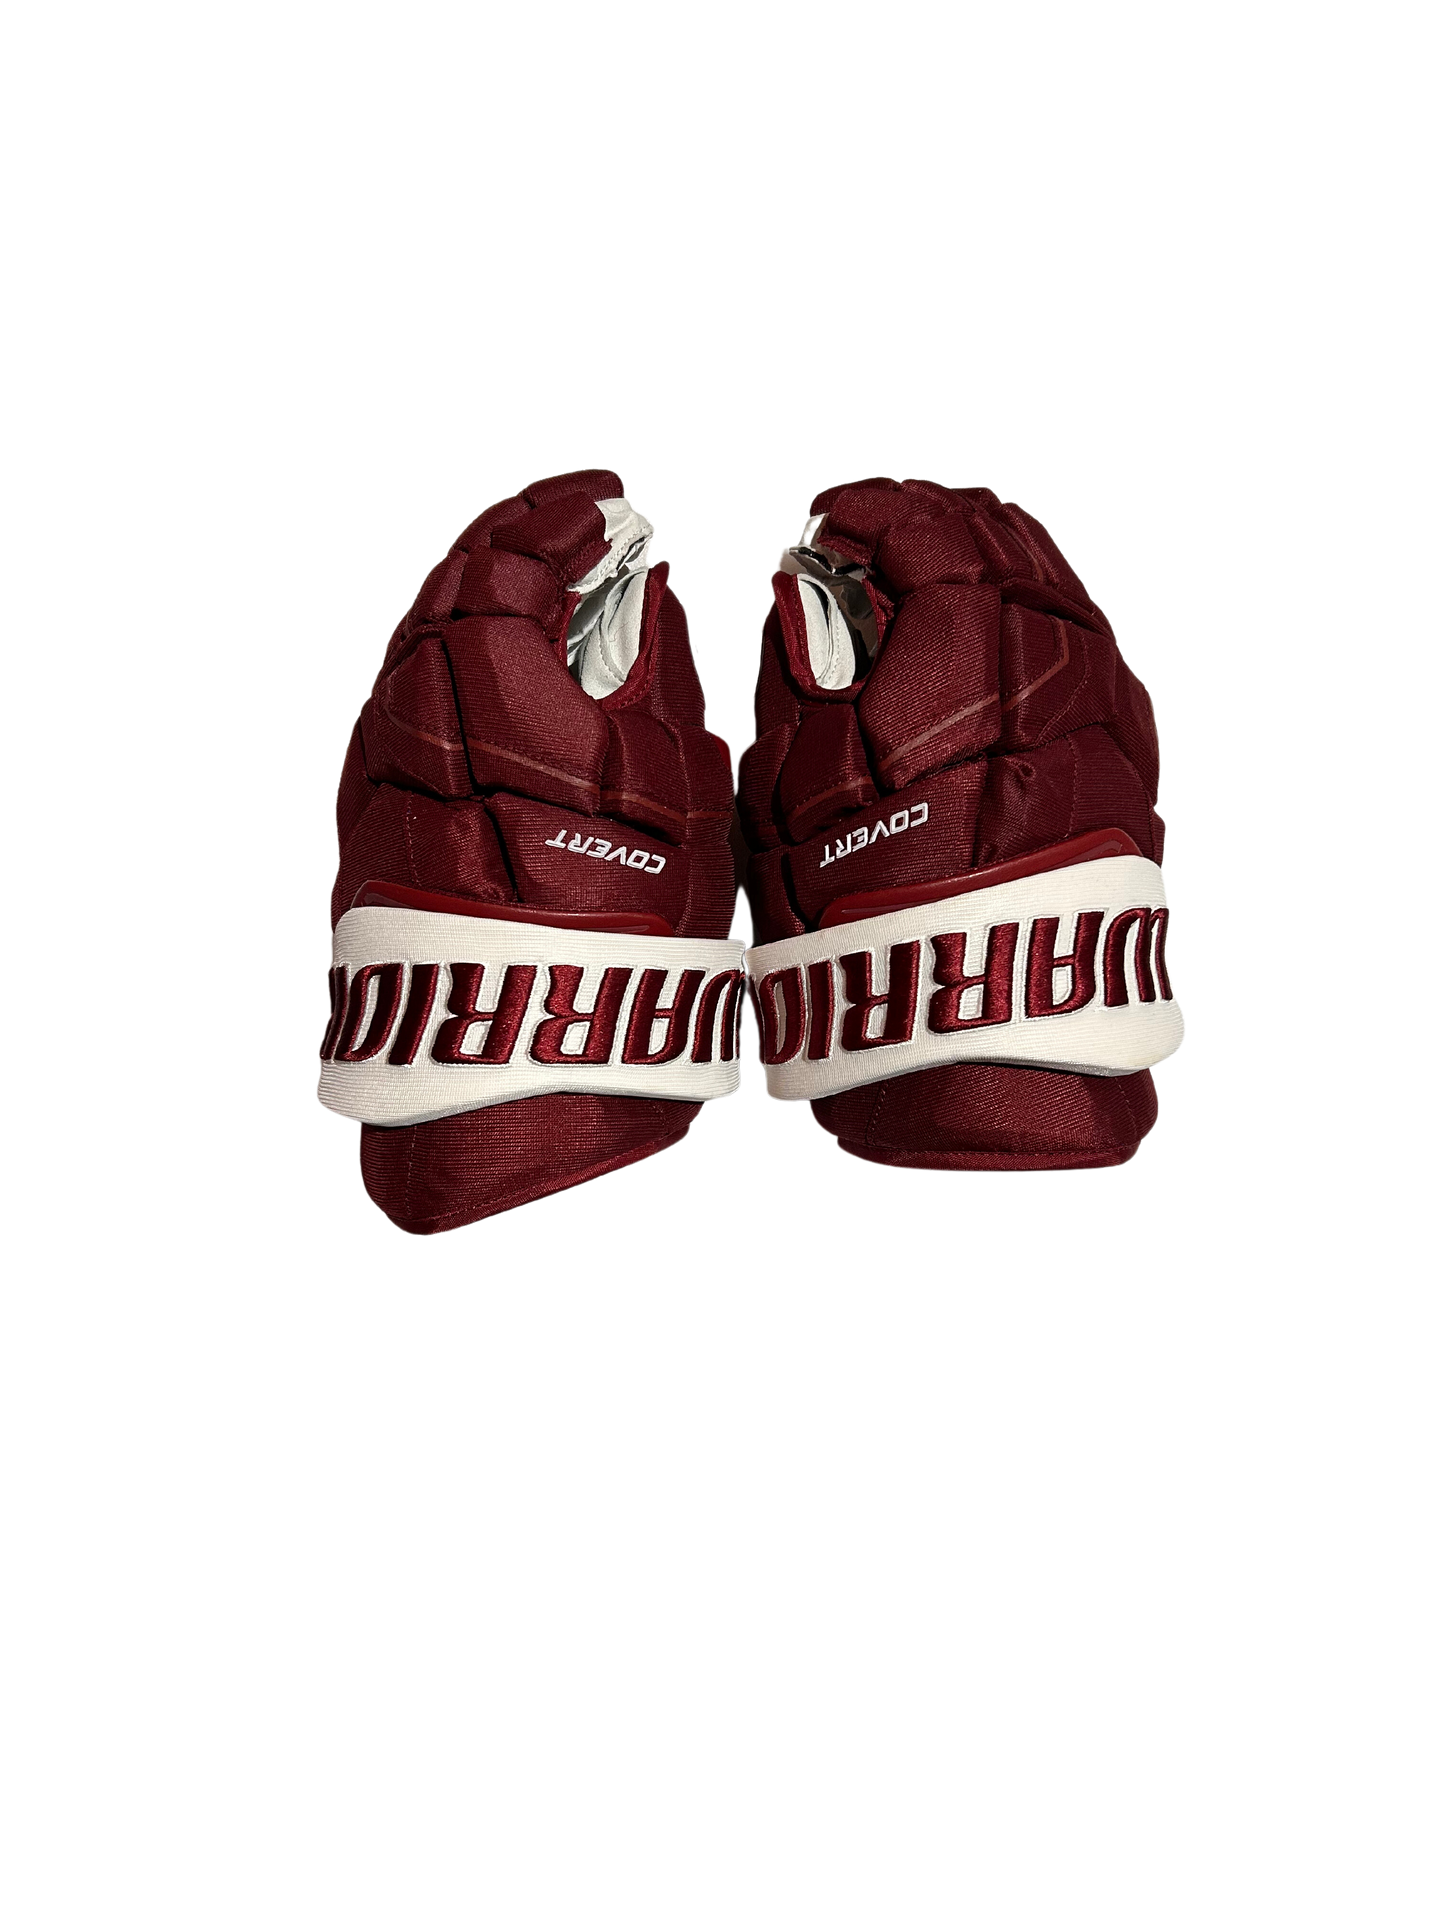 New Team Issued Reverse Retro Colorado Avalanche 14" Warrior Covert Gloves